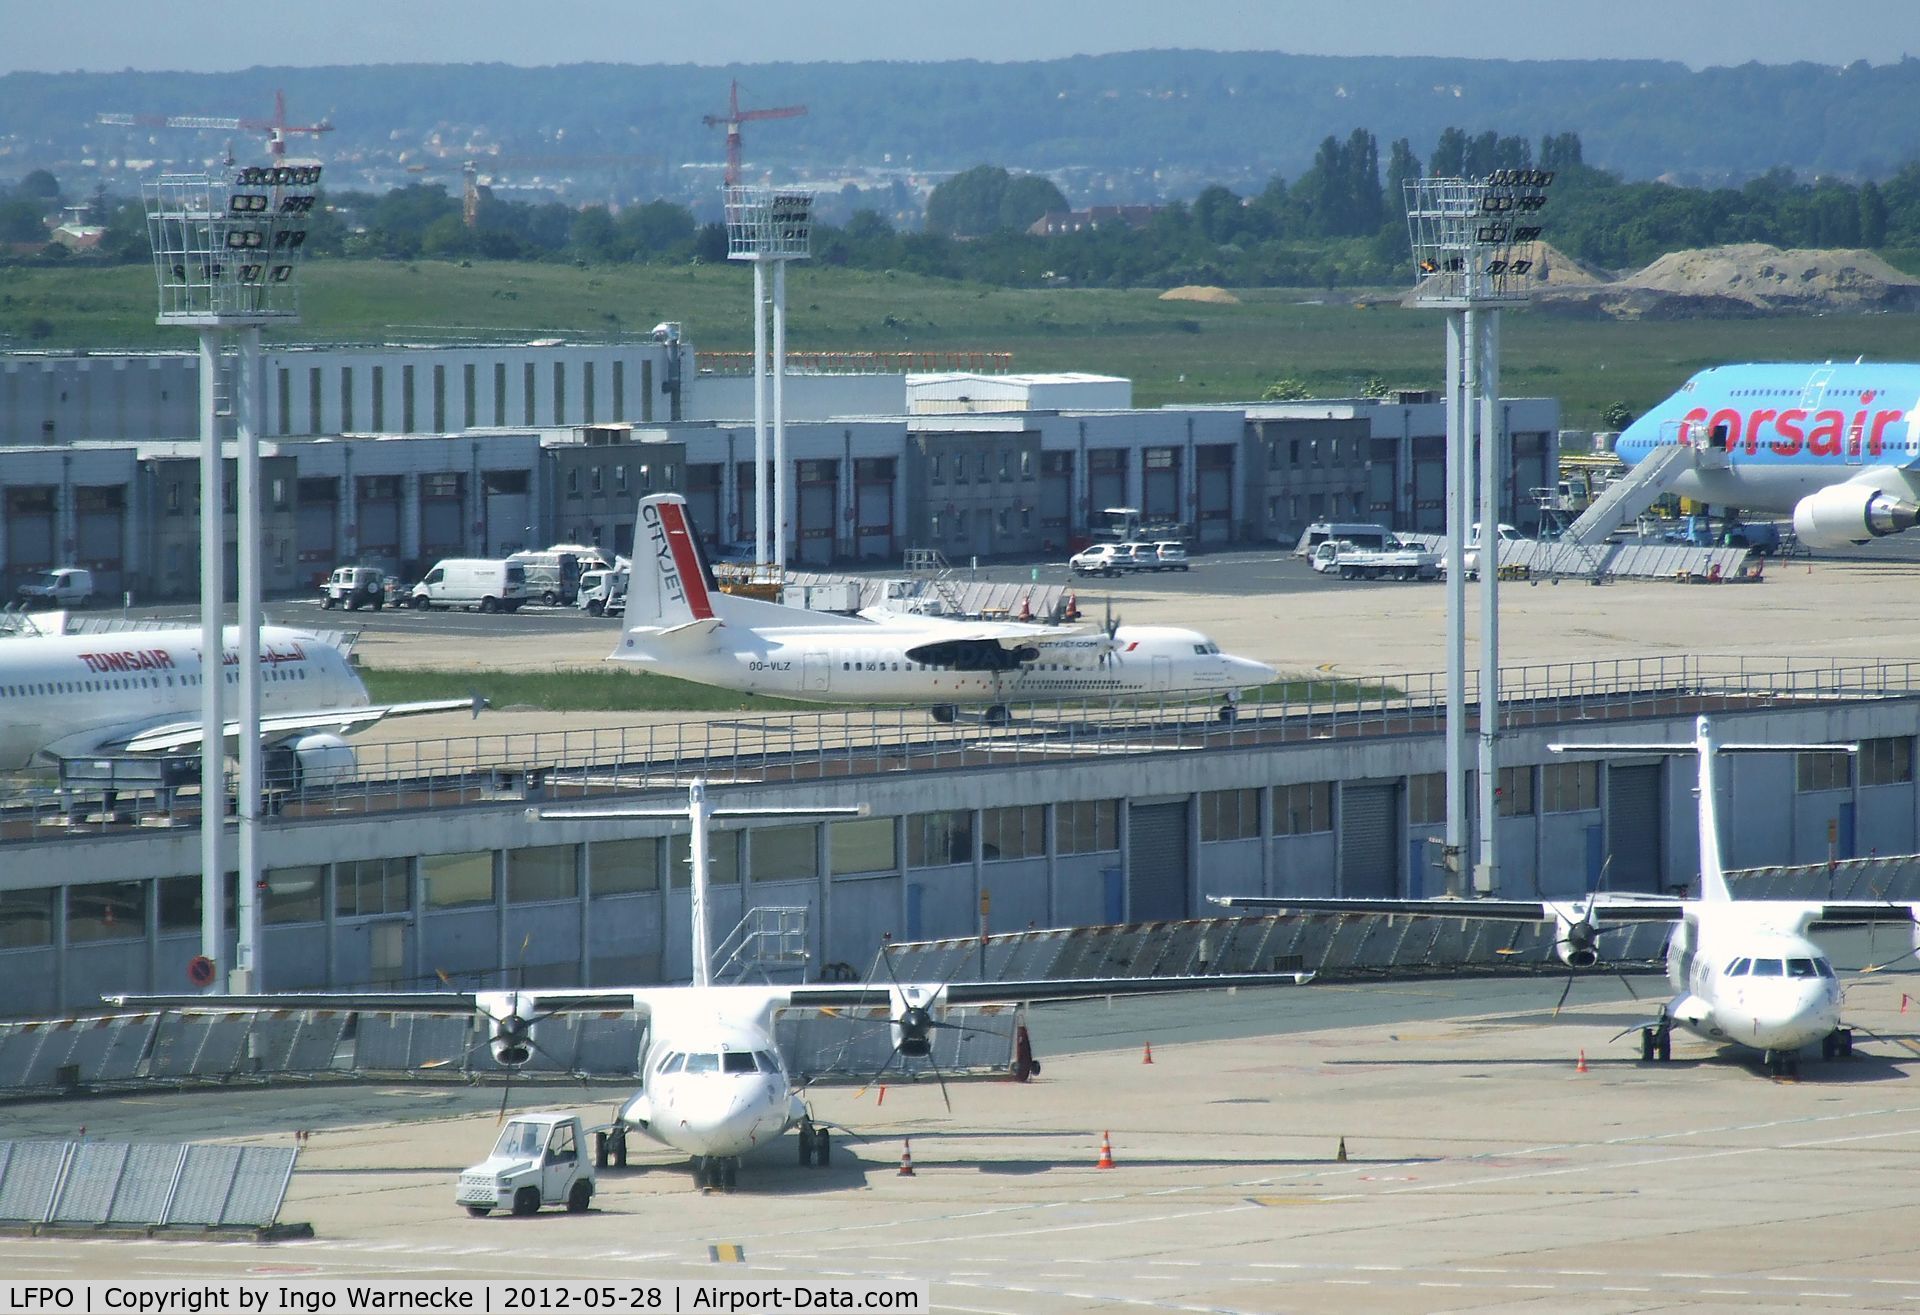 Paris Orly Airport, Orly (near Paris) France (LFPO) - a busy day at Paris-Orly airport